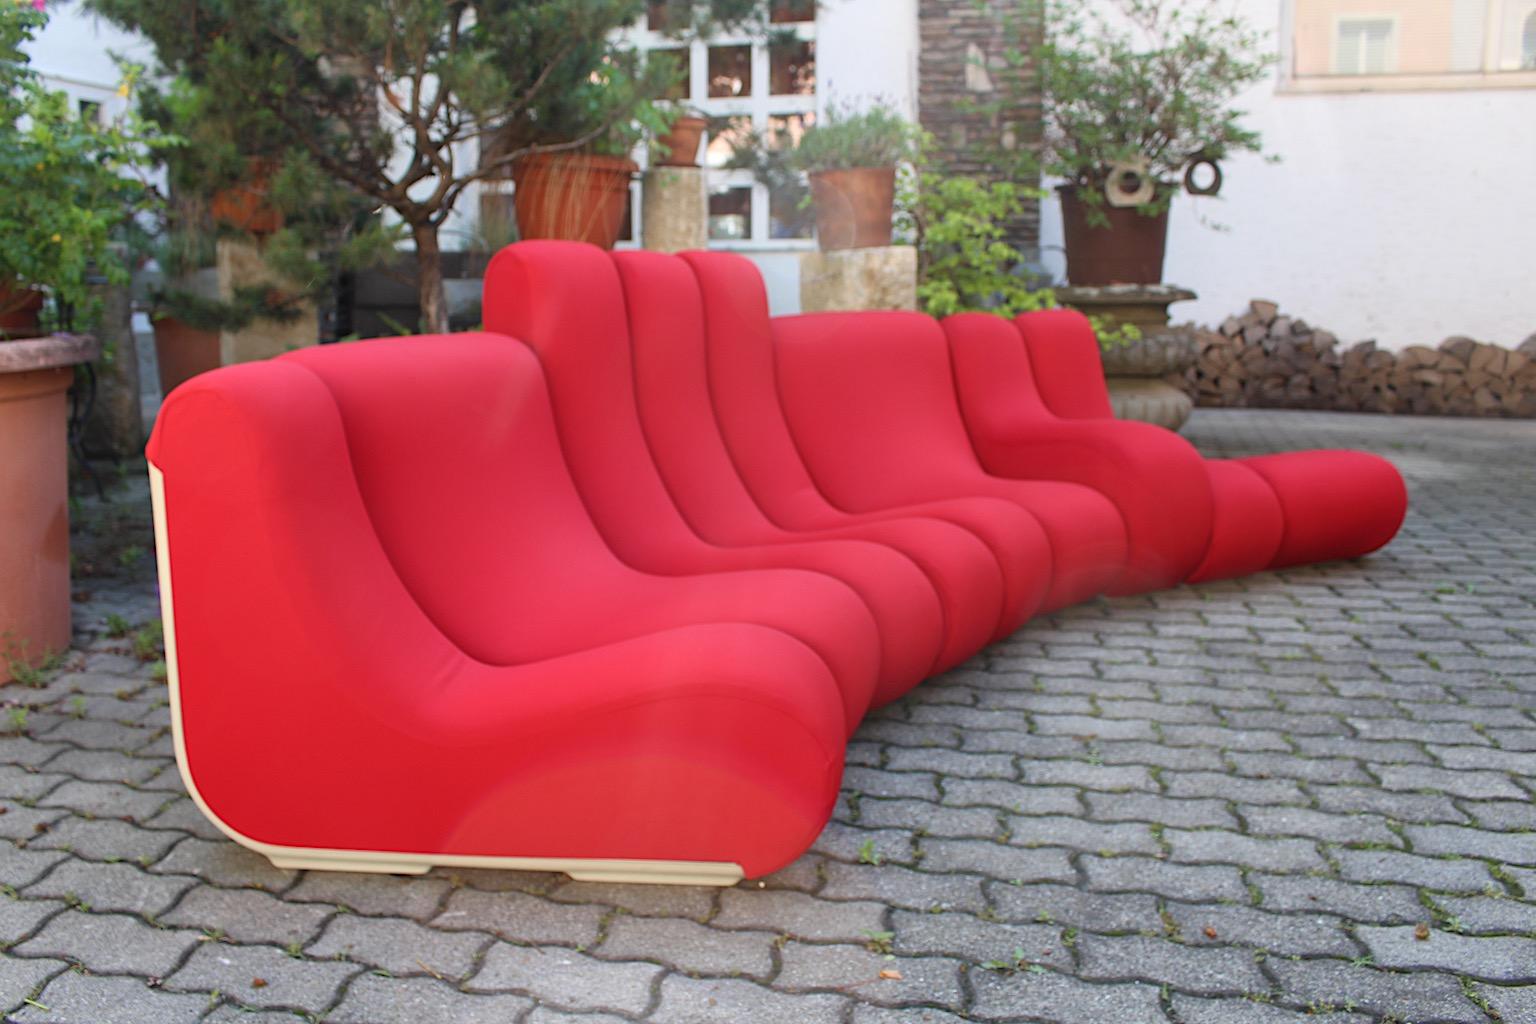 Space Age Vintage Red Sectional Freestanding Sofa Vario Pillo Burghardt Vogtherr In Good Condition For Sale In Vienna, AT